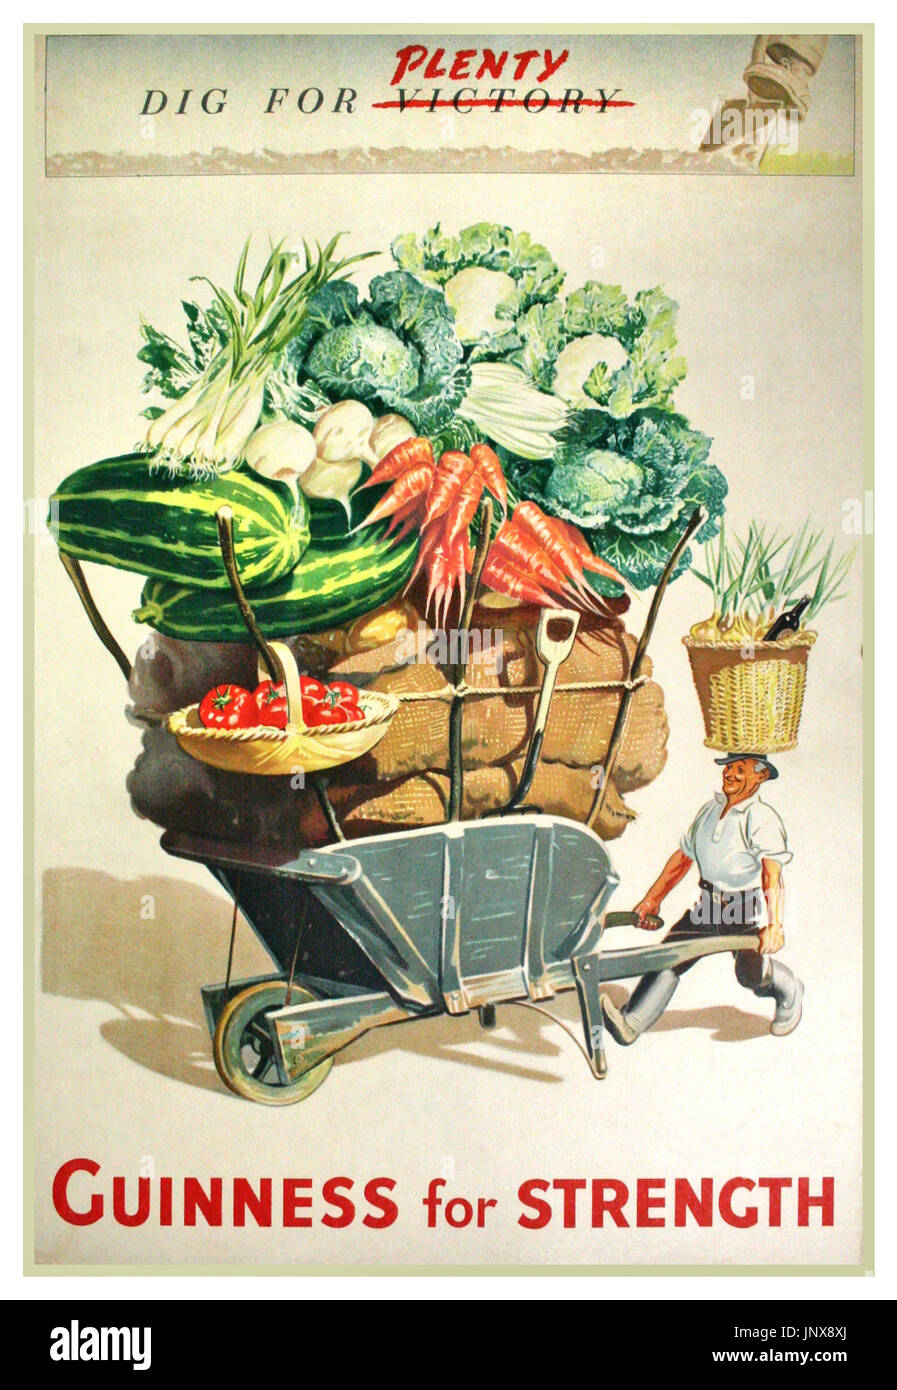 WW2 British Propaganda Advertising poster 1940's Dig for (Victory) Plenty  promoting Guinness for strength to dig for plenty and produce vegetables for victory Stock Photo